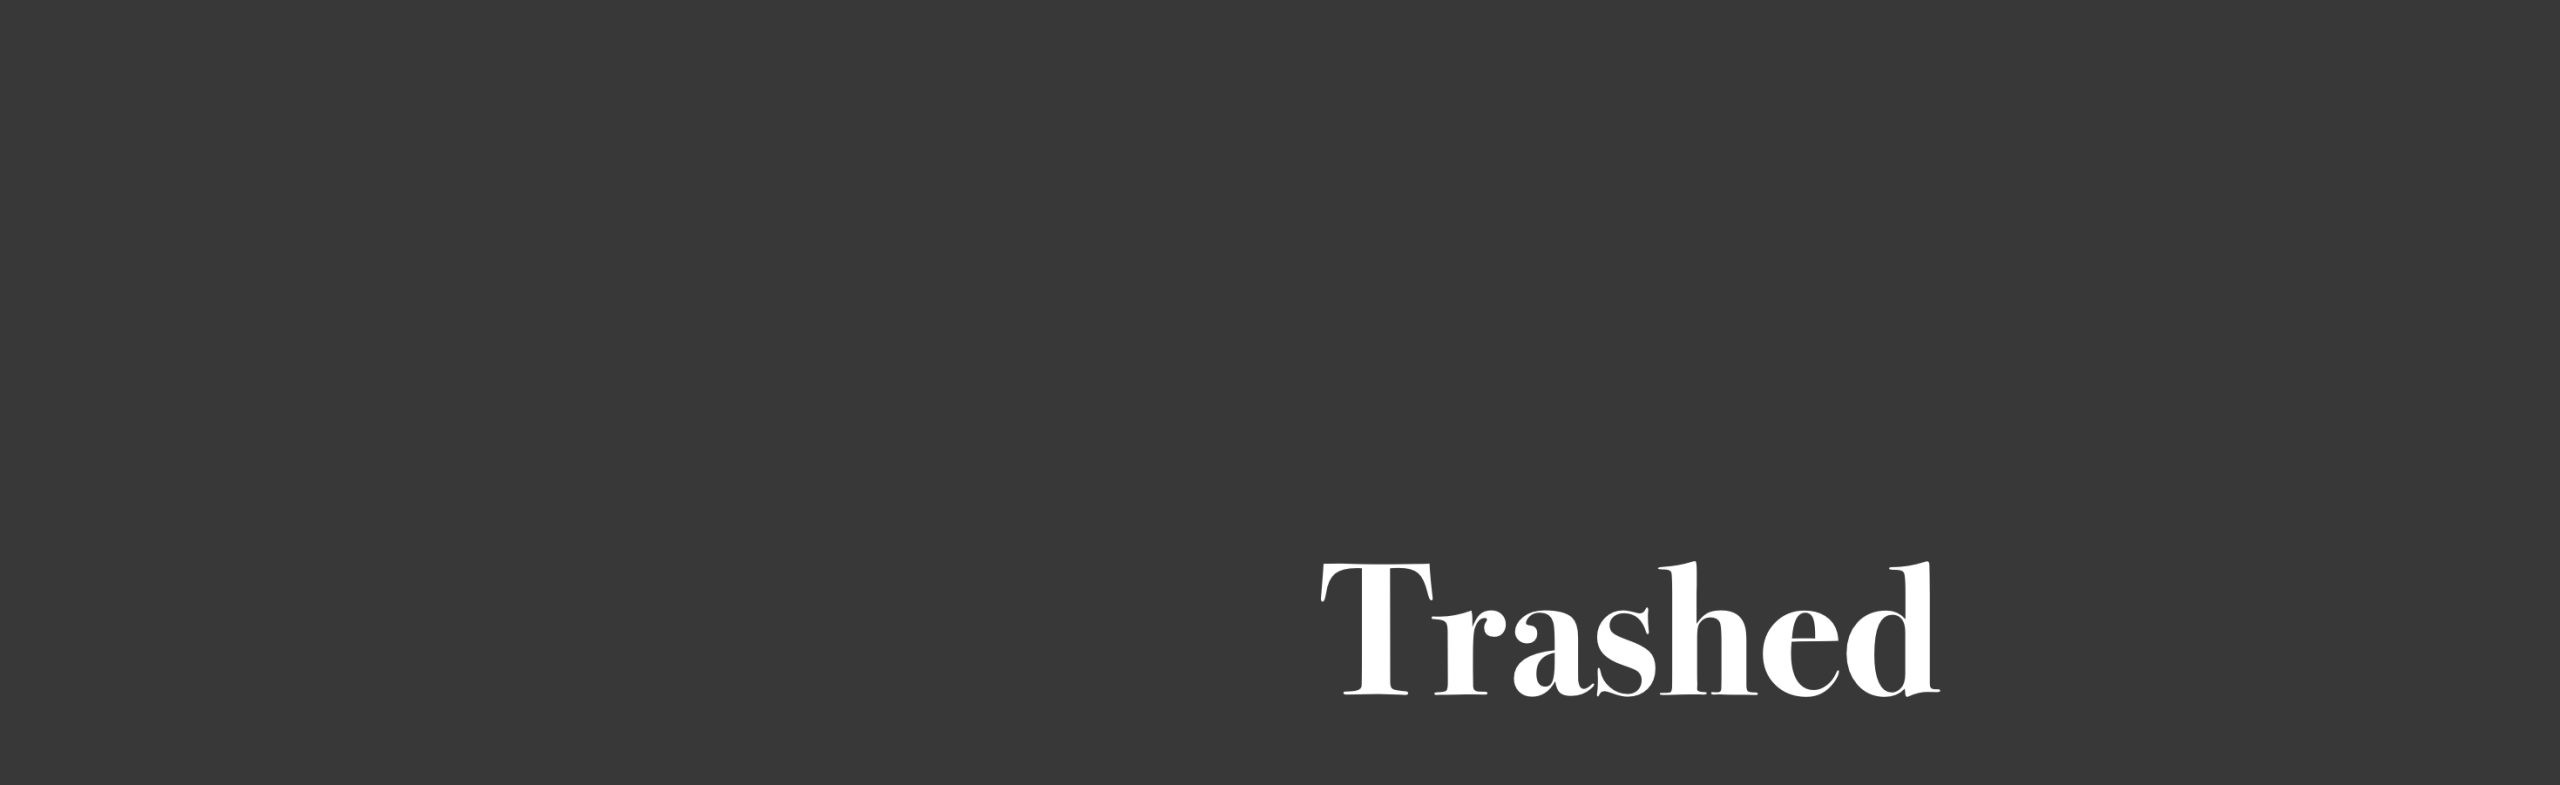 Opening of “Trashed”